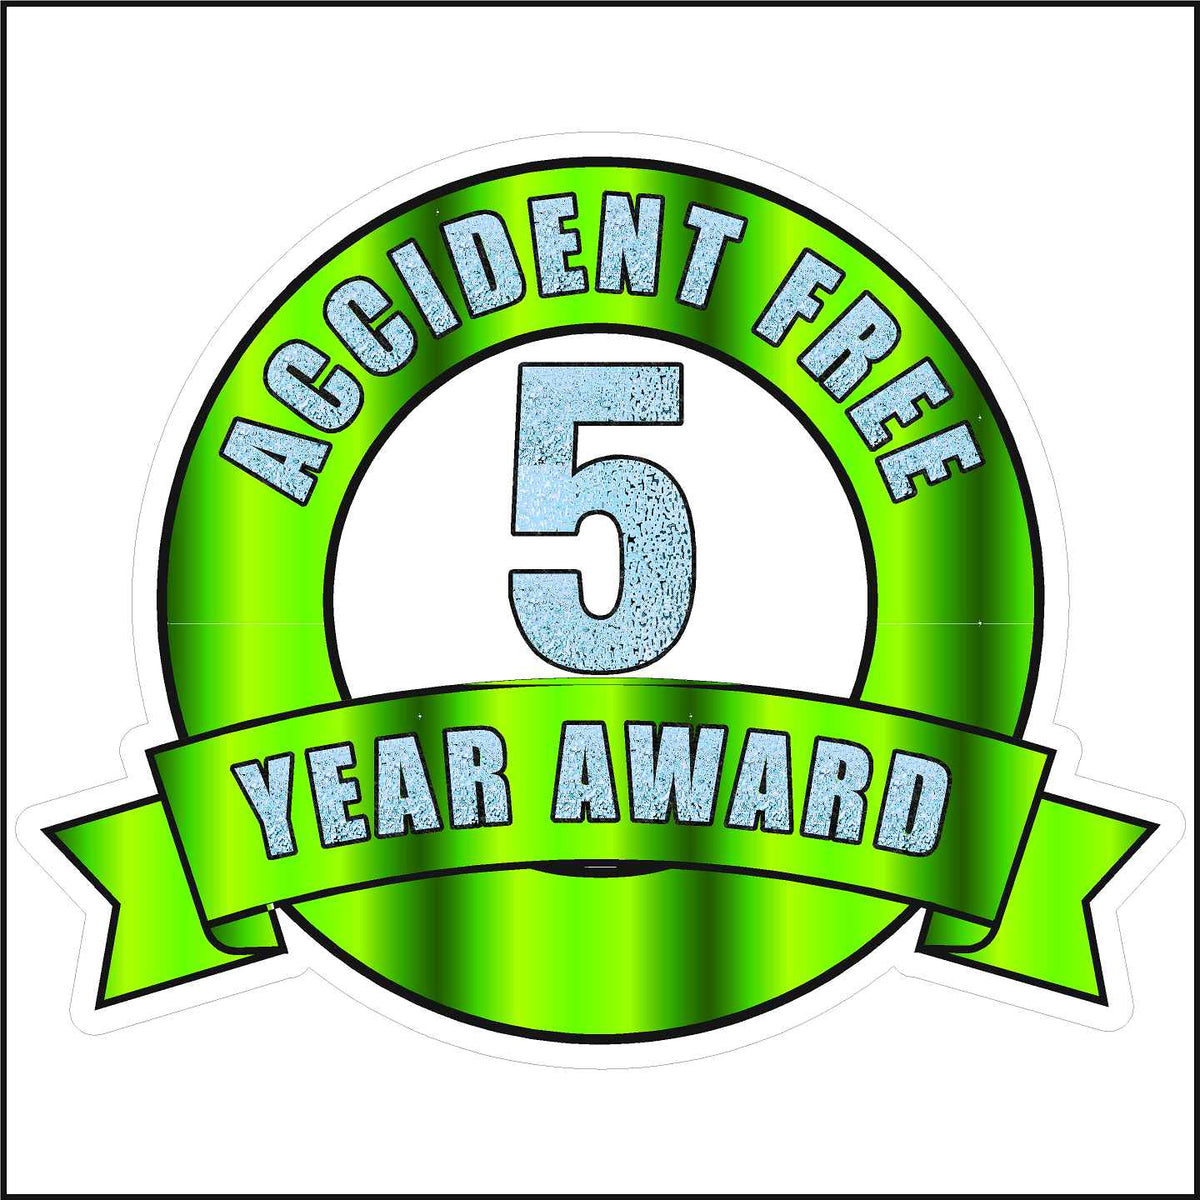 Green and shiny aqua colored accident free 5 year award sticker.